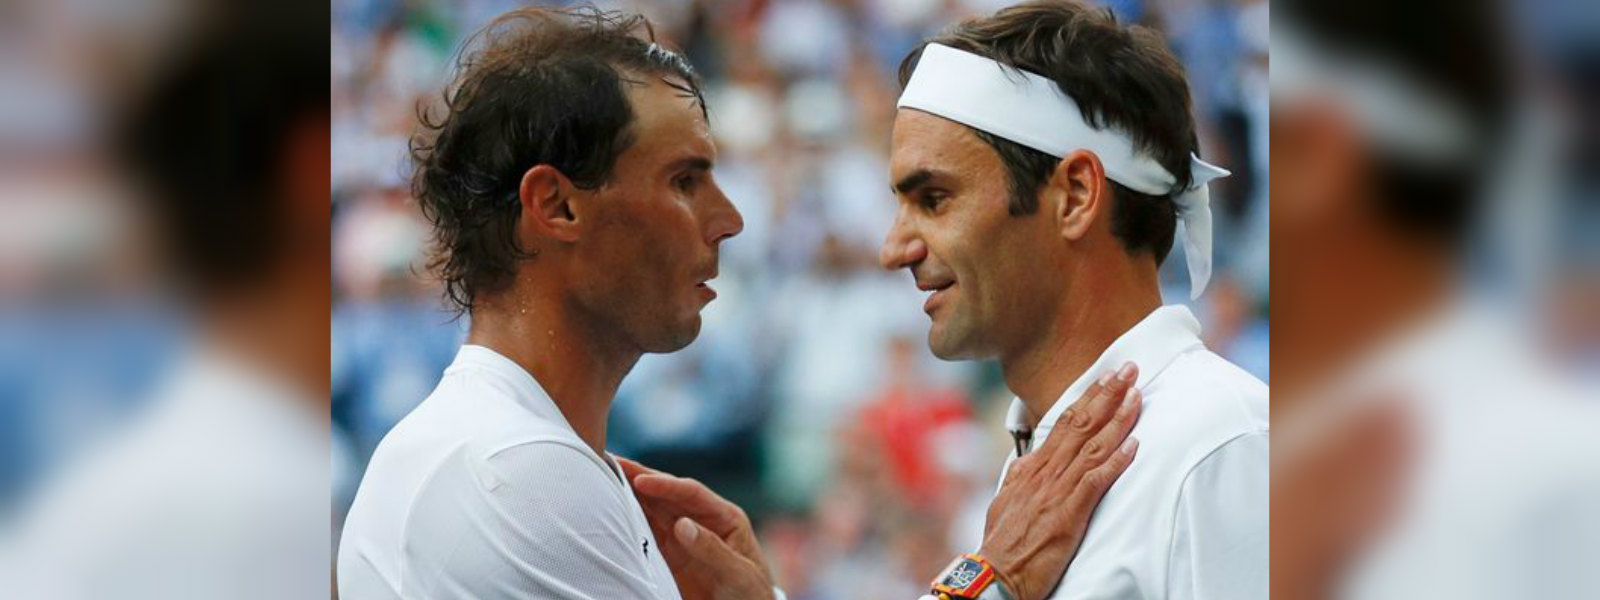 Federer says his thrilling semifinal against Nadal “had everything”